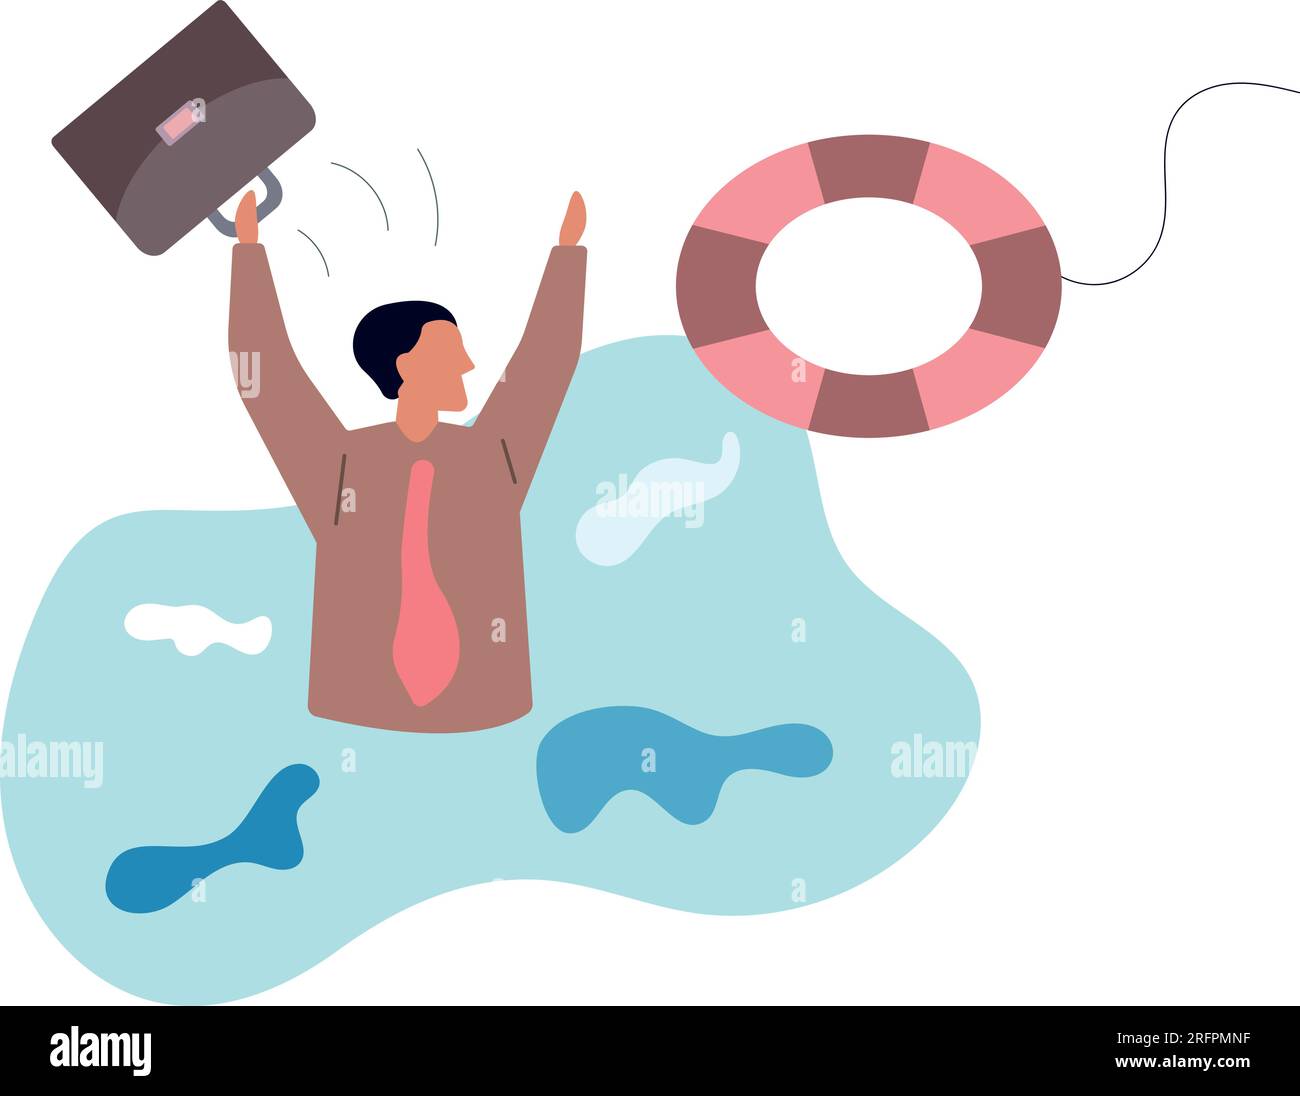 Help in crisis, life saver, rescue or business support, safe and security aid to solve problem, emergency lifebuoy concept.flat vector illustration. Stock Vector